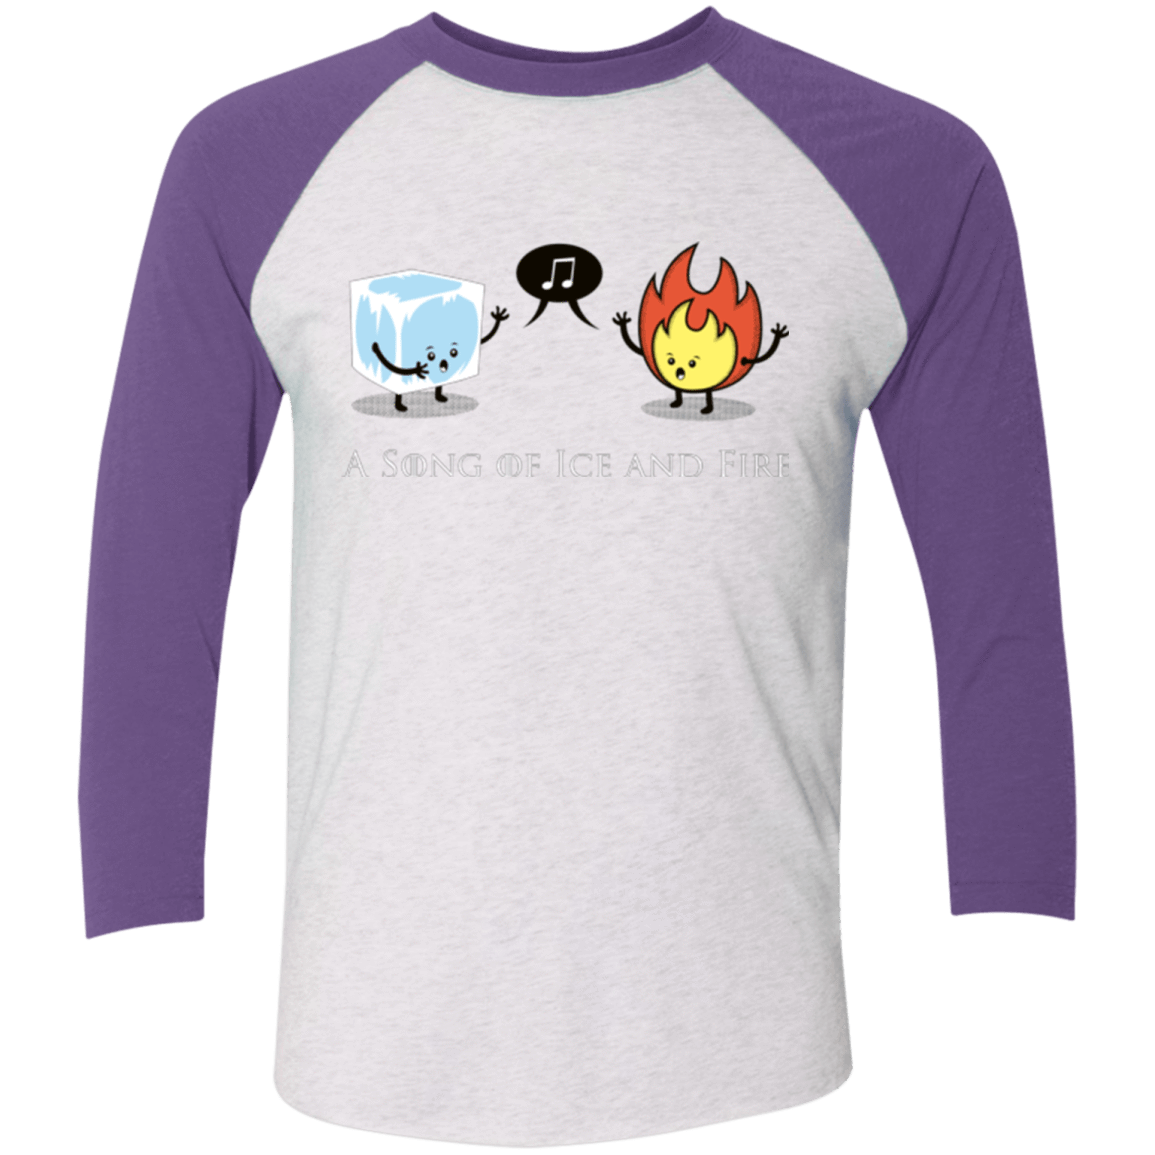 T-Shirts Heather White/Purple Rush / X-Small A Song of Ice and Fire Men's Triblend 3/4 Sleeve